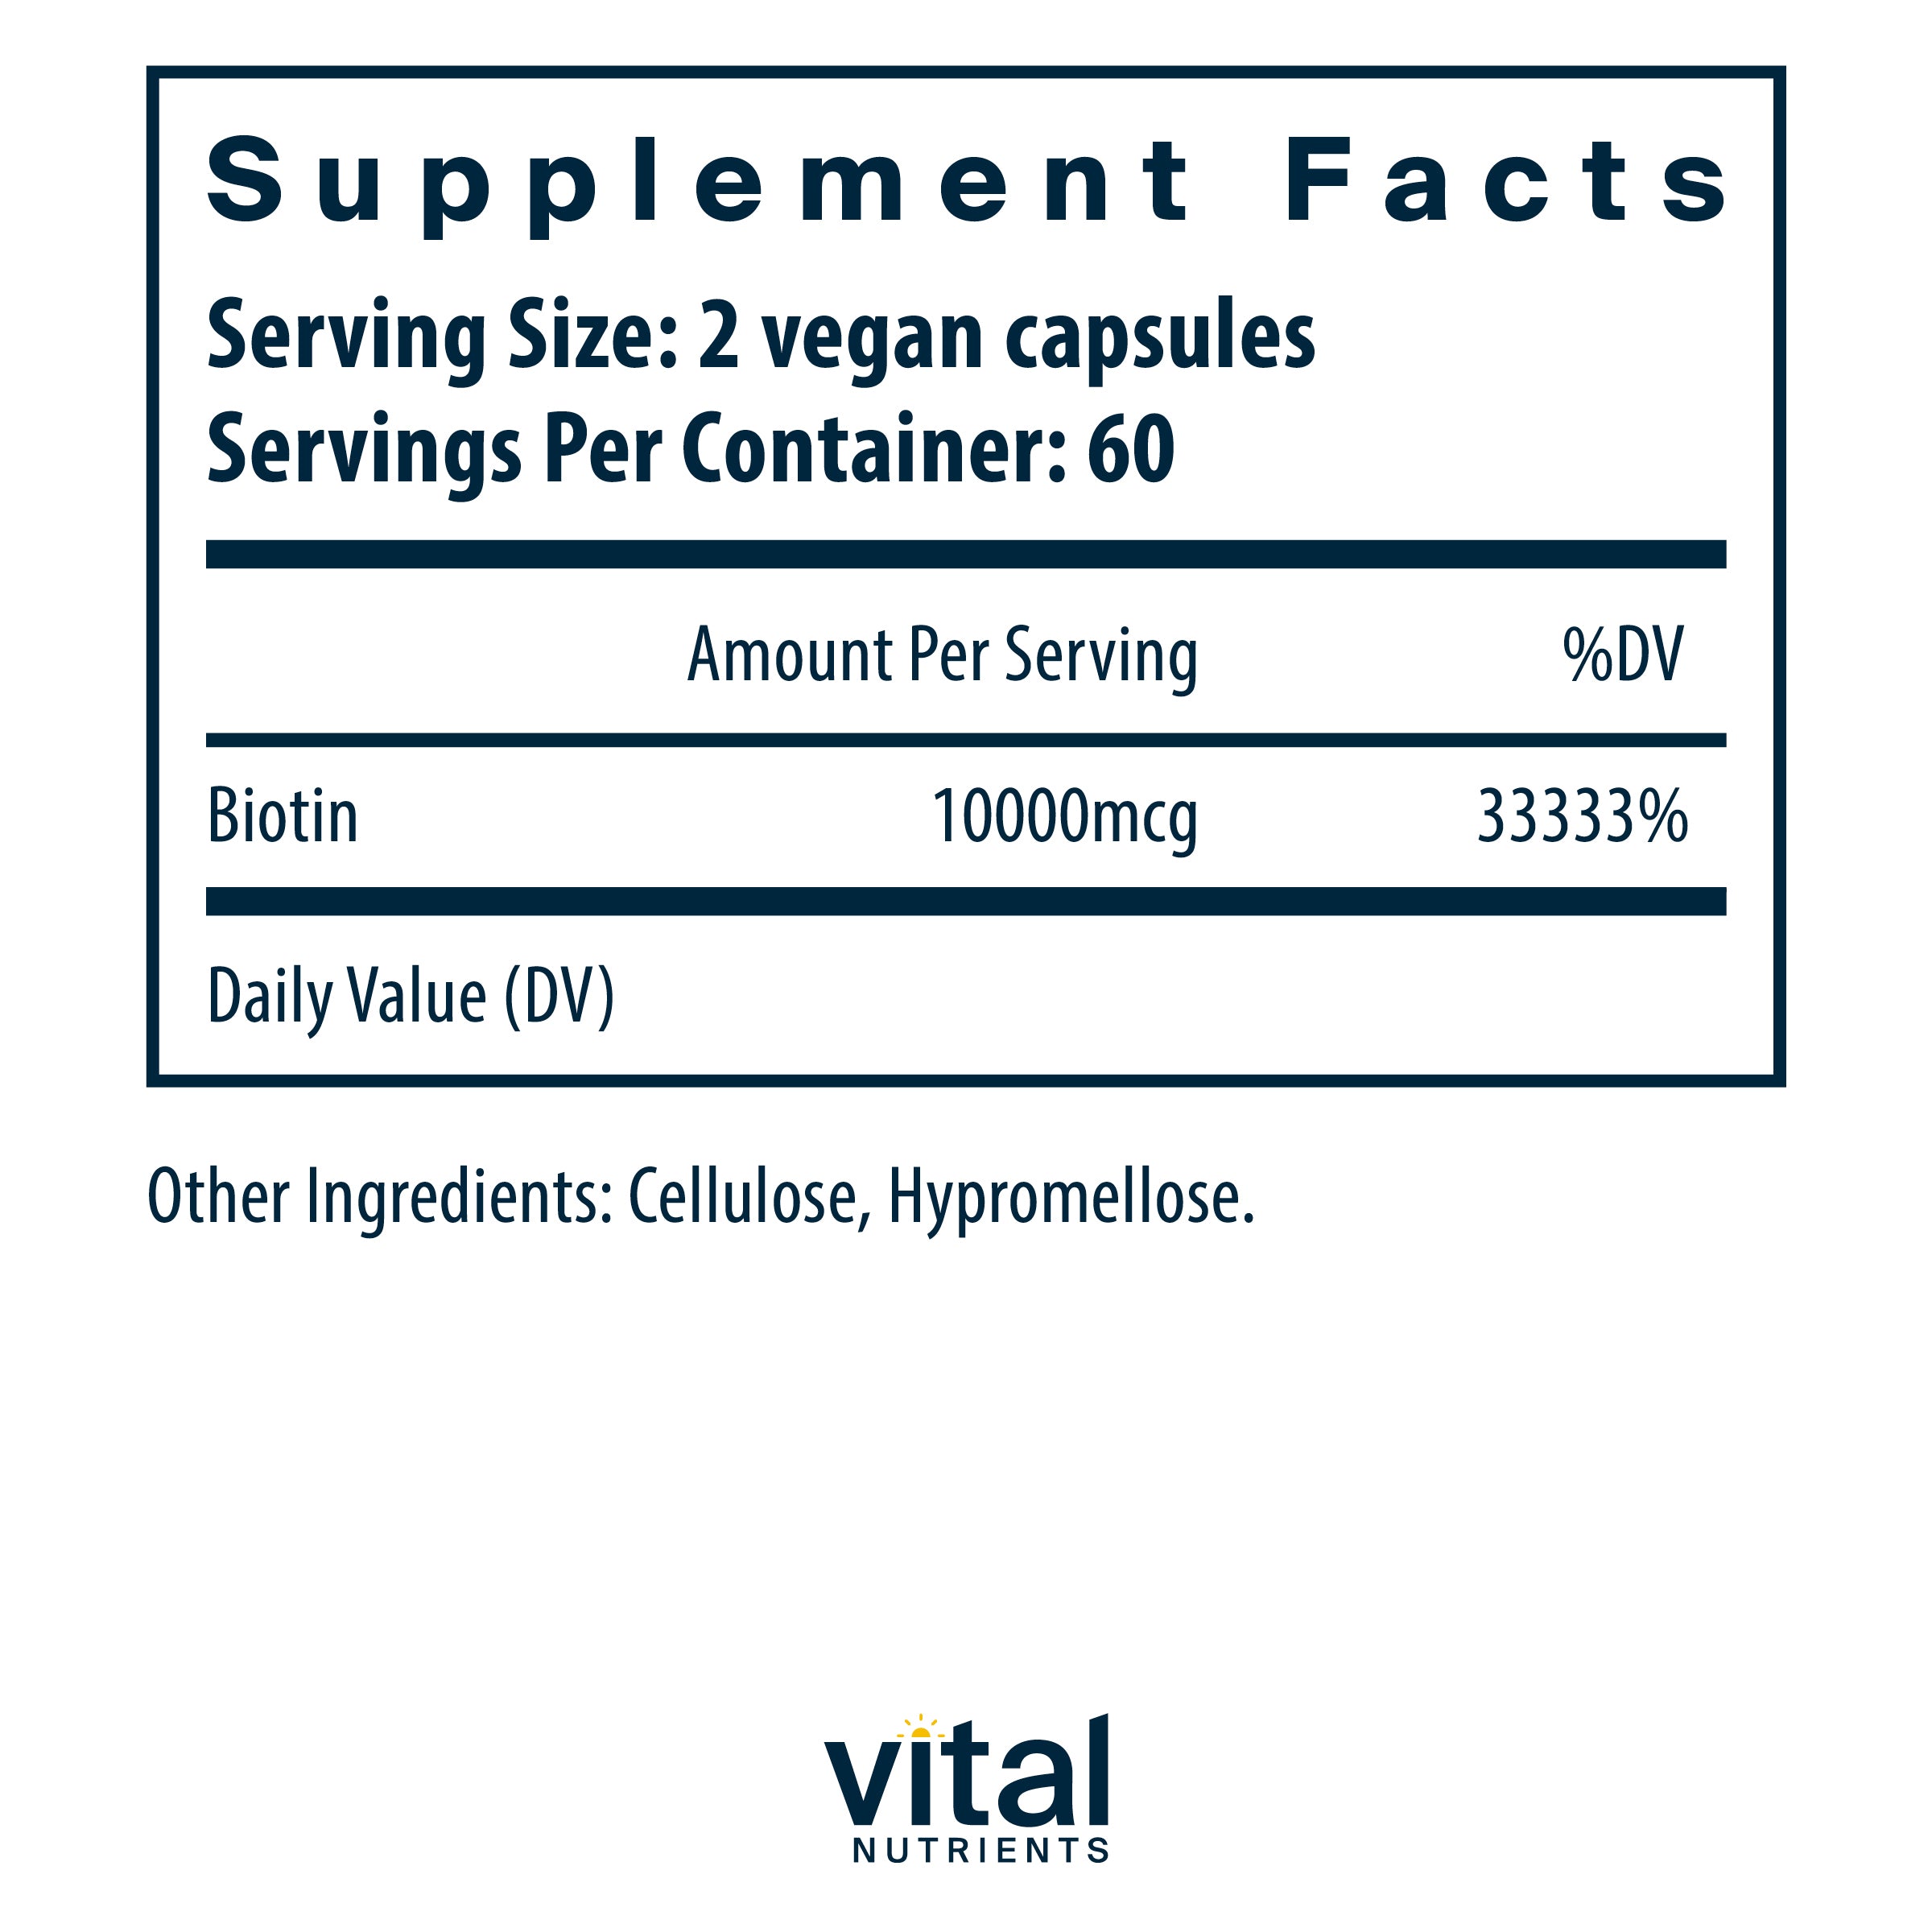 Vital Nutrients Biotin 10mg Supplement Facts Image